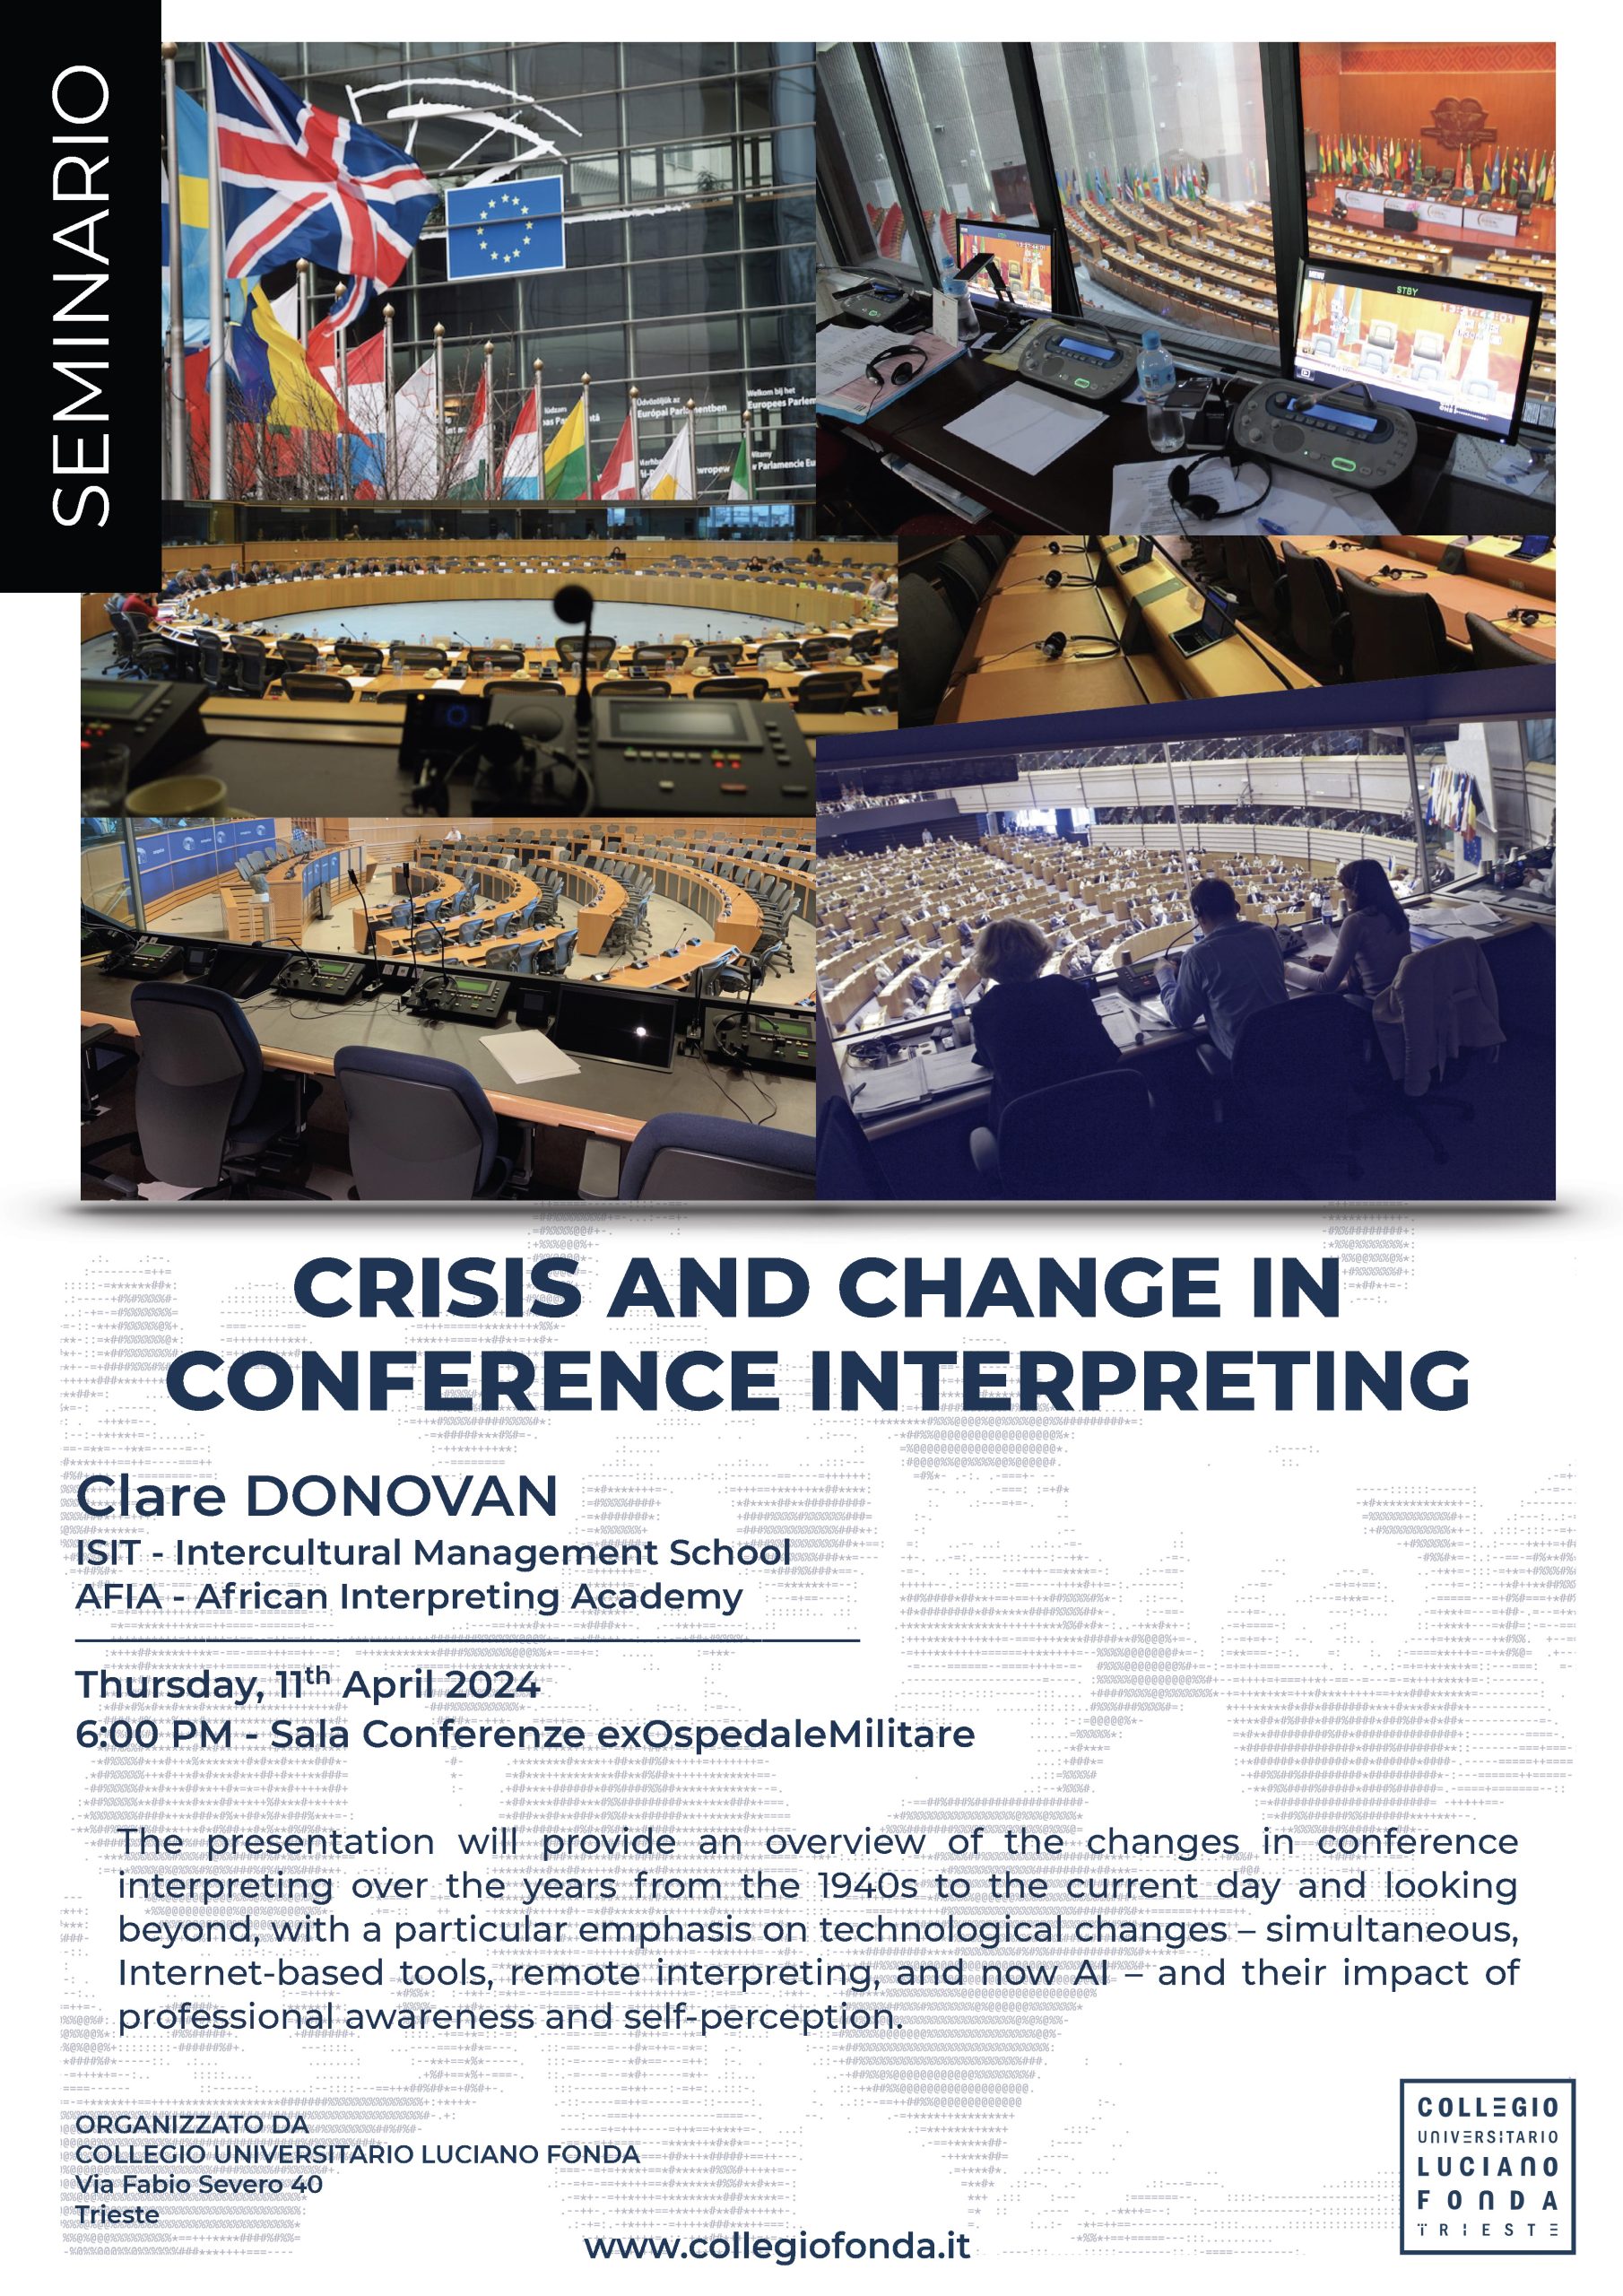 CRISIS AND CHANGE IN CONFERENCE INTERPRETING • Seminar by Clare Donovan – Thursday, 11th April 2024